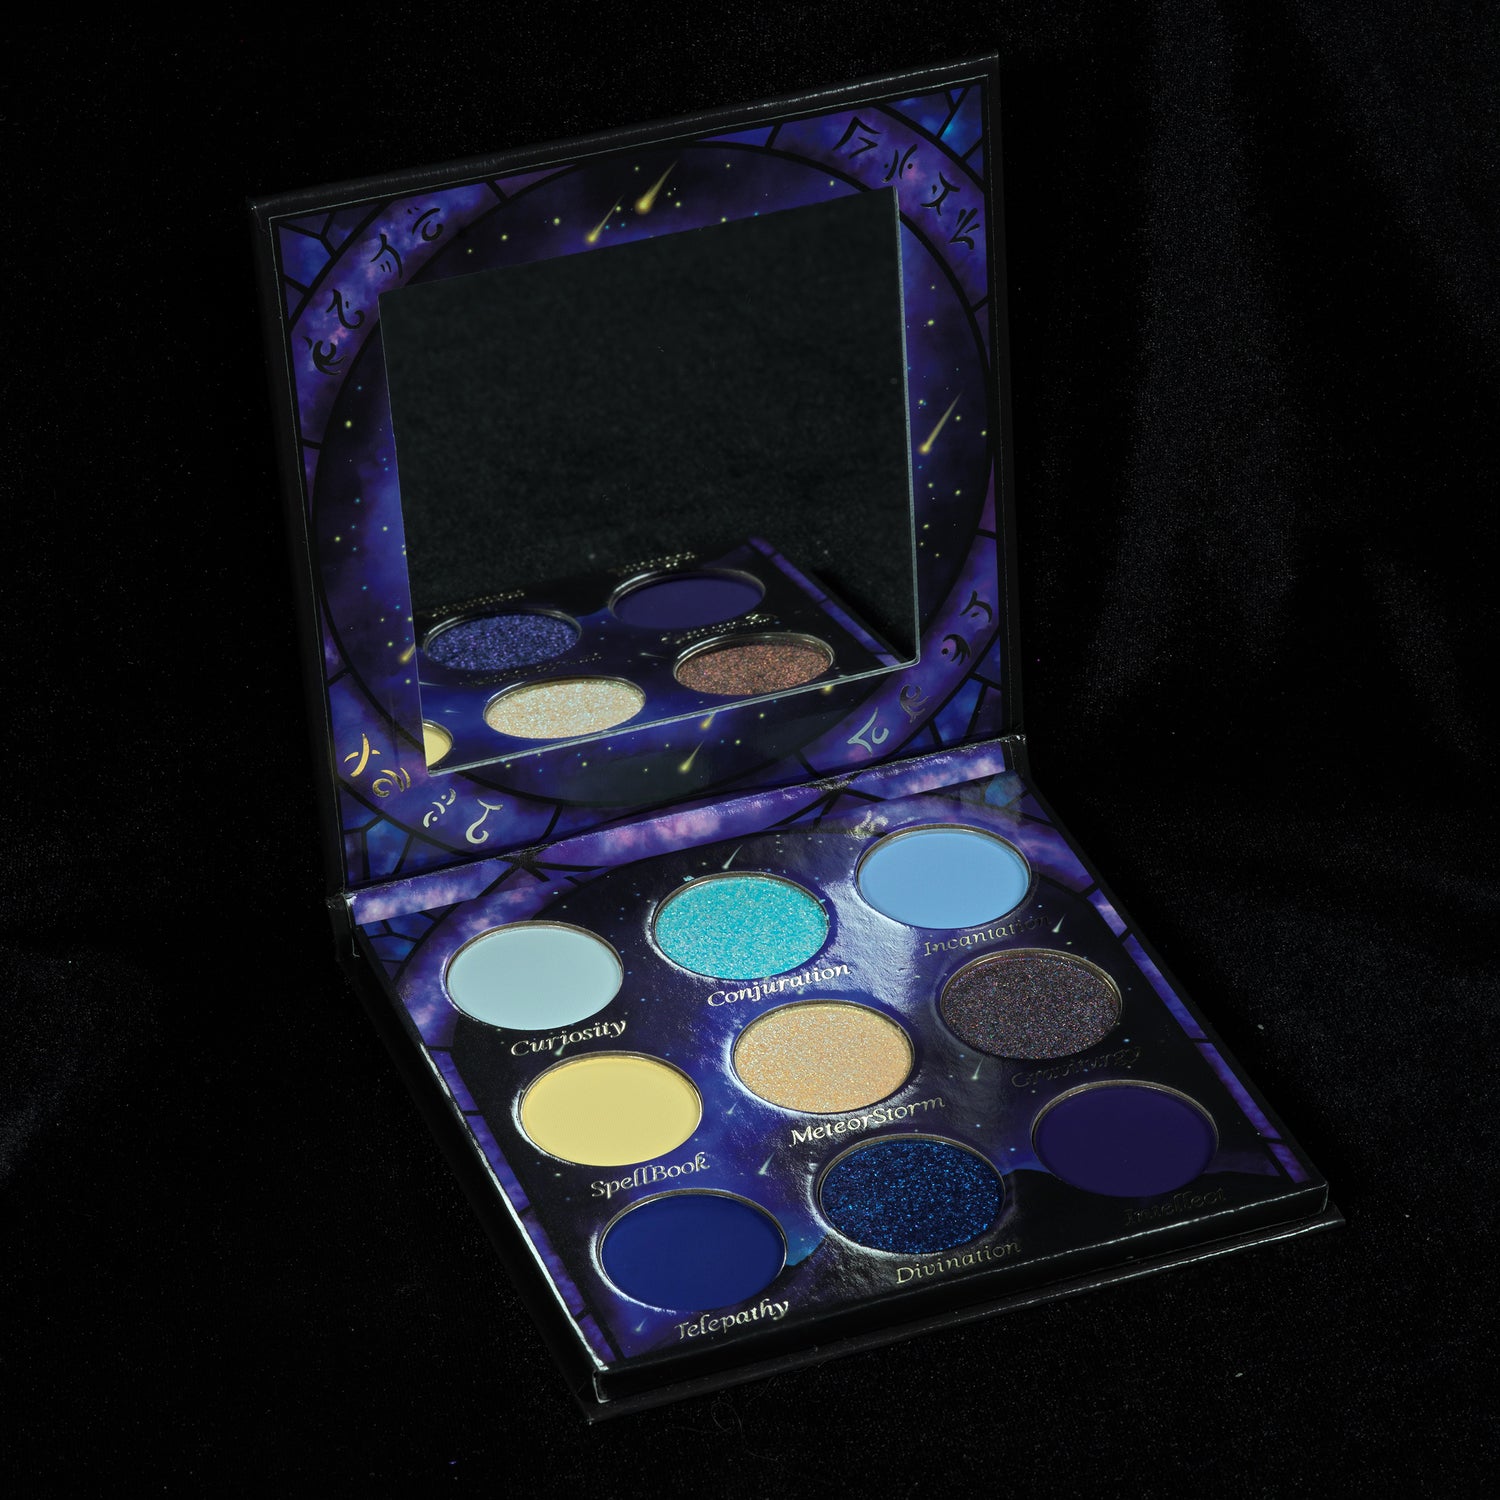 Wizard eyeshadow palette by Fantasy Cosmetica opened